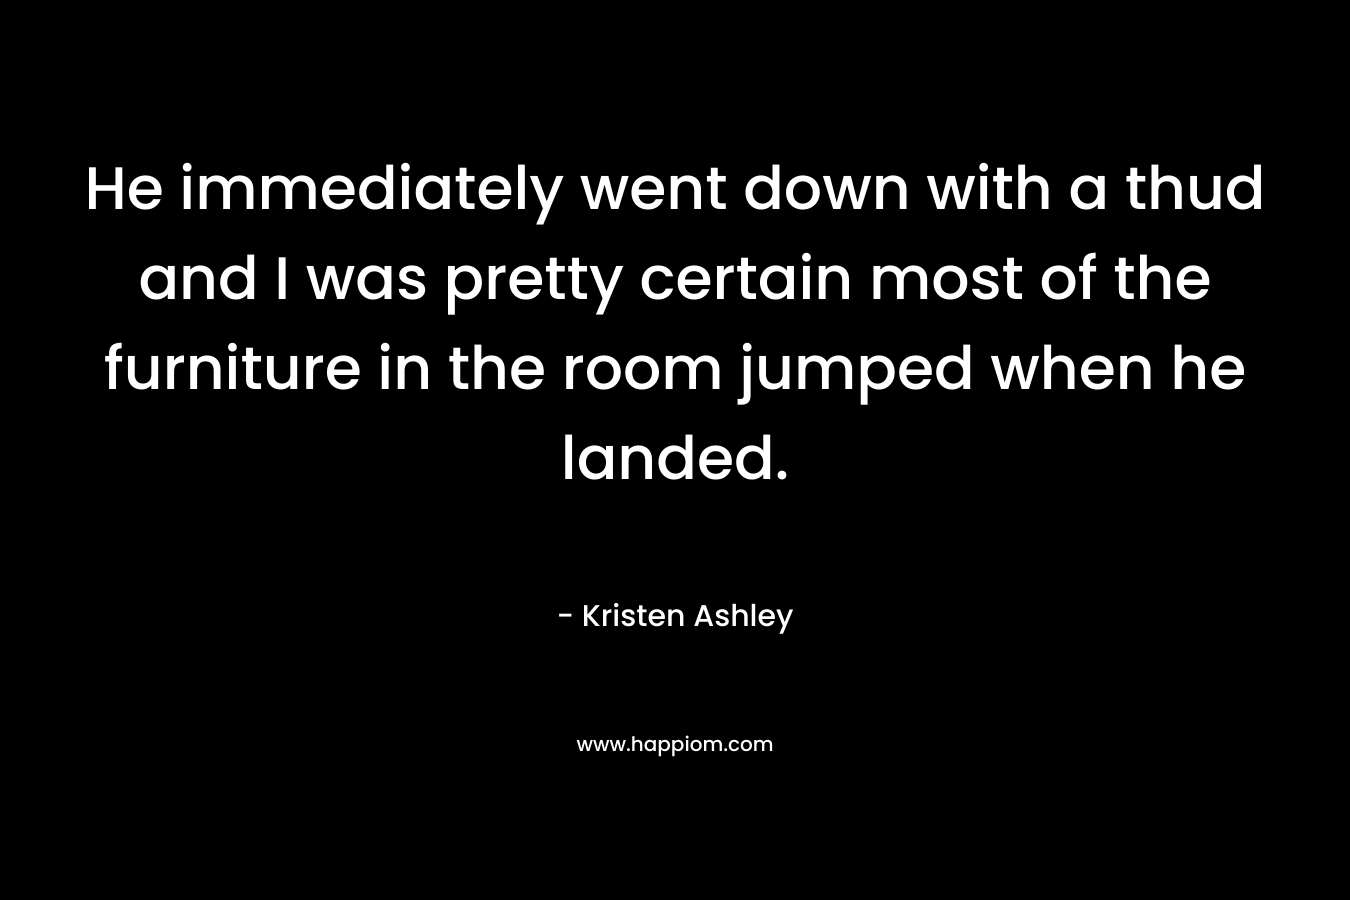 He immediately went down with a thud and I was pretty certain most of the furniture in the room jumped when he landed. – Kristen Ashley